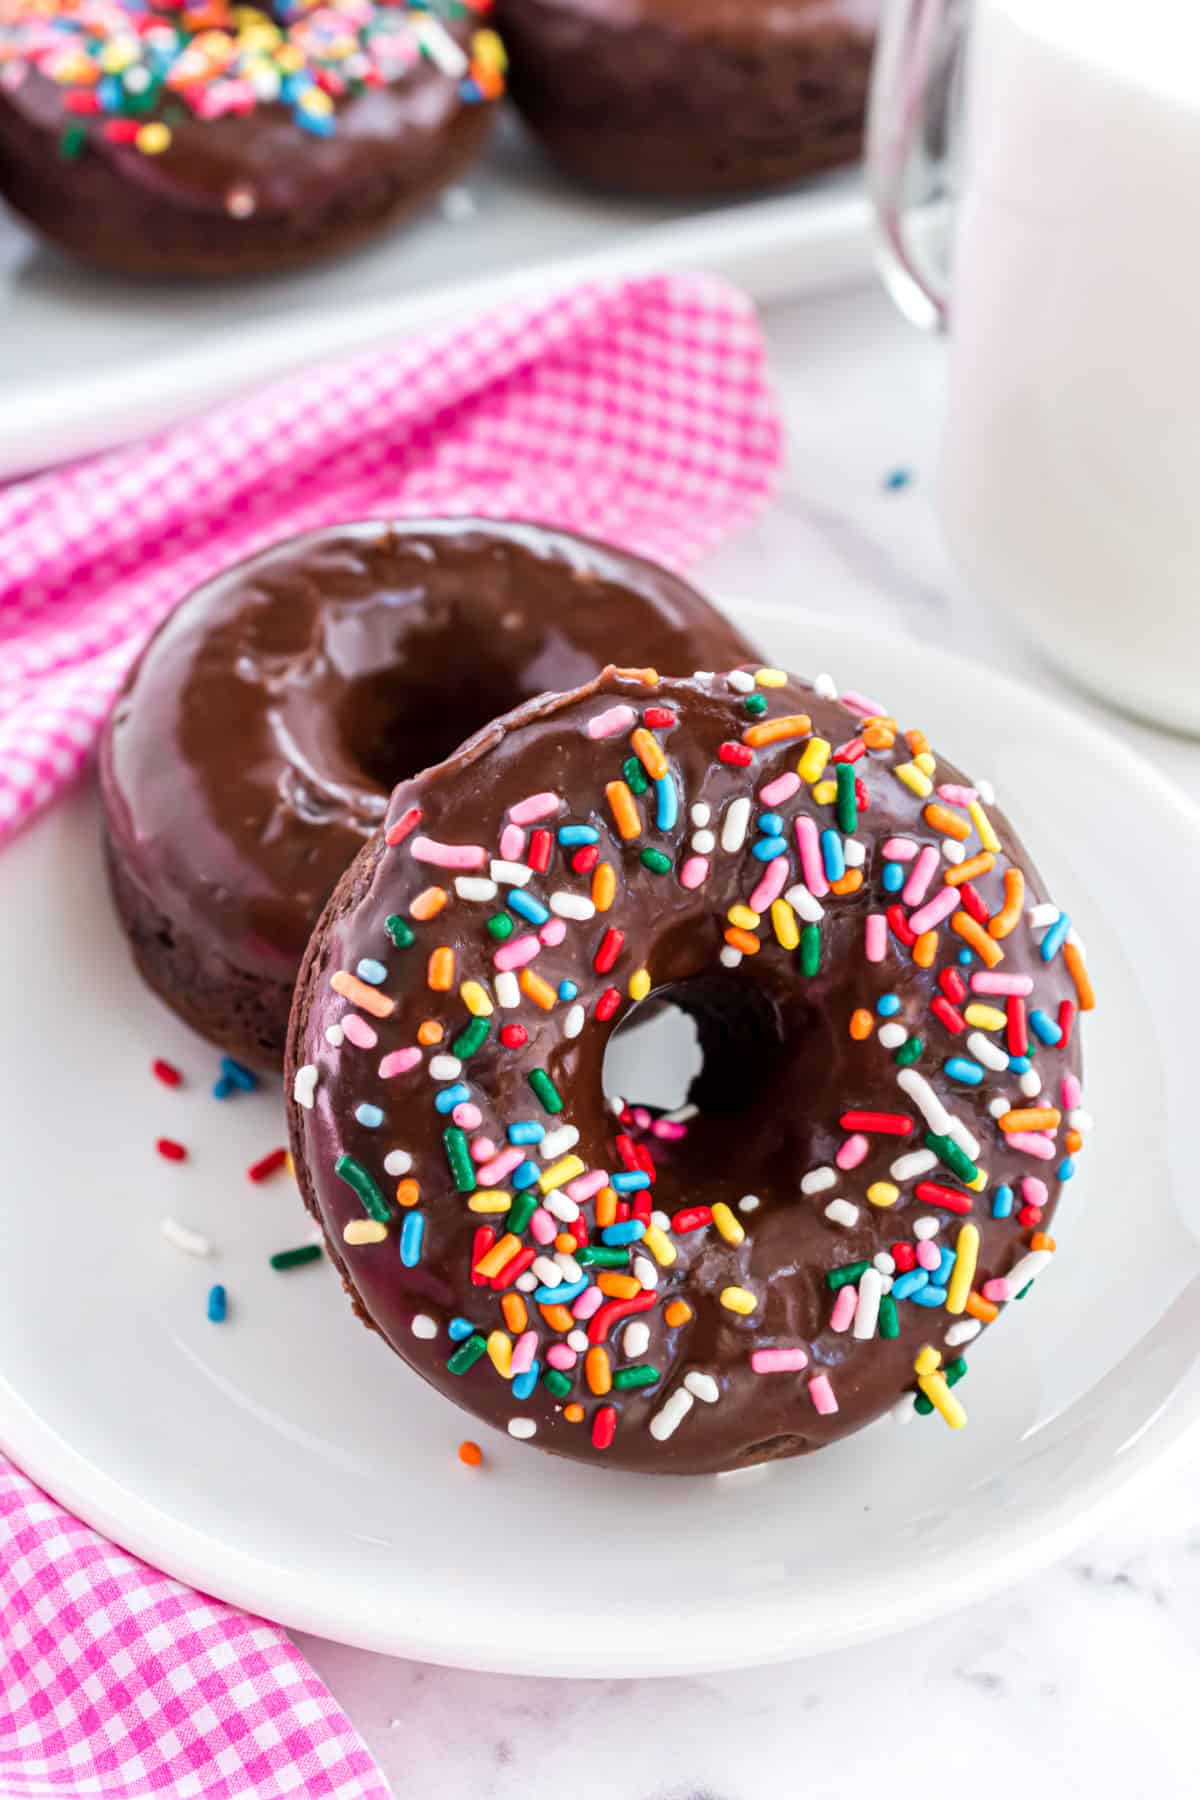 Two chocolate donuts on a white plate with pink gingham napkin.